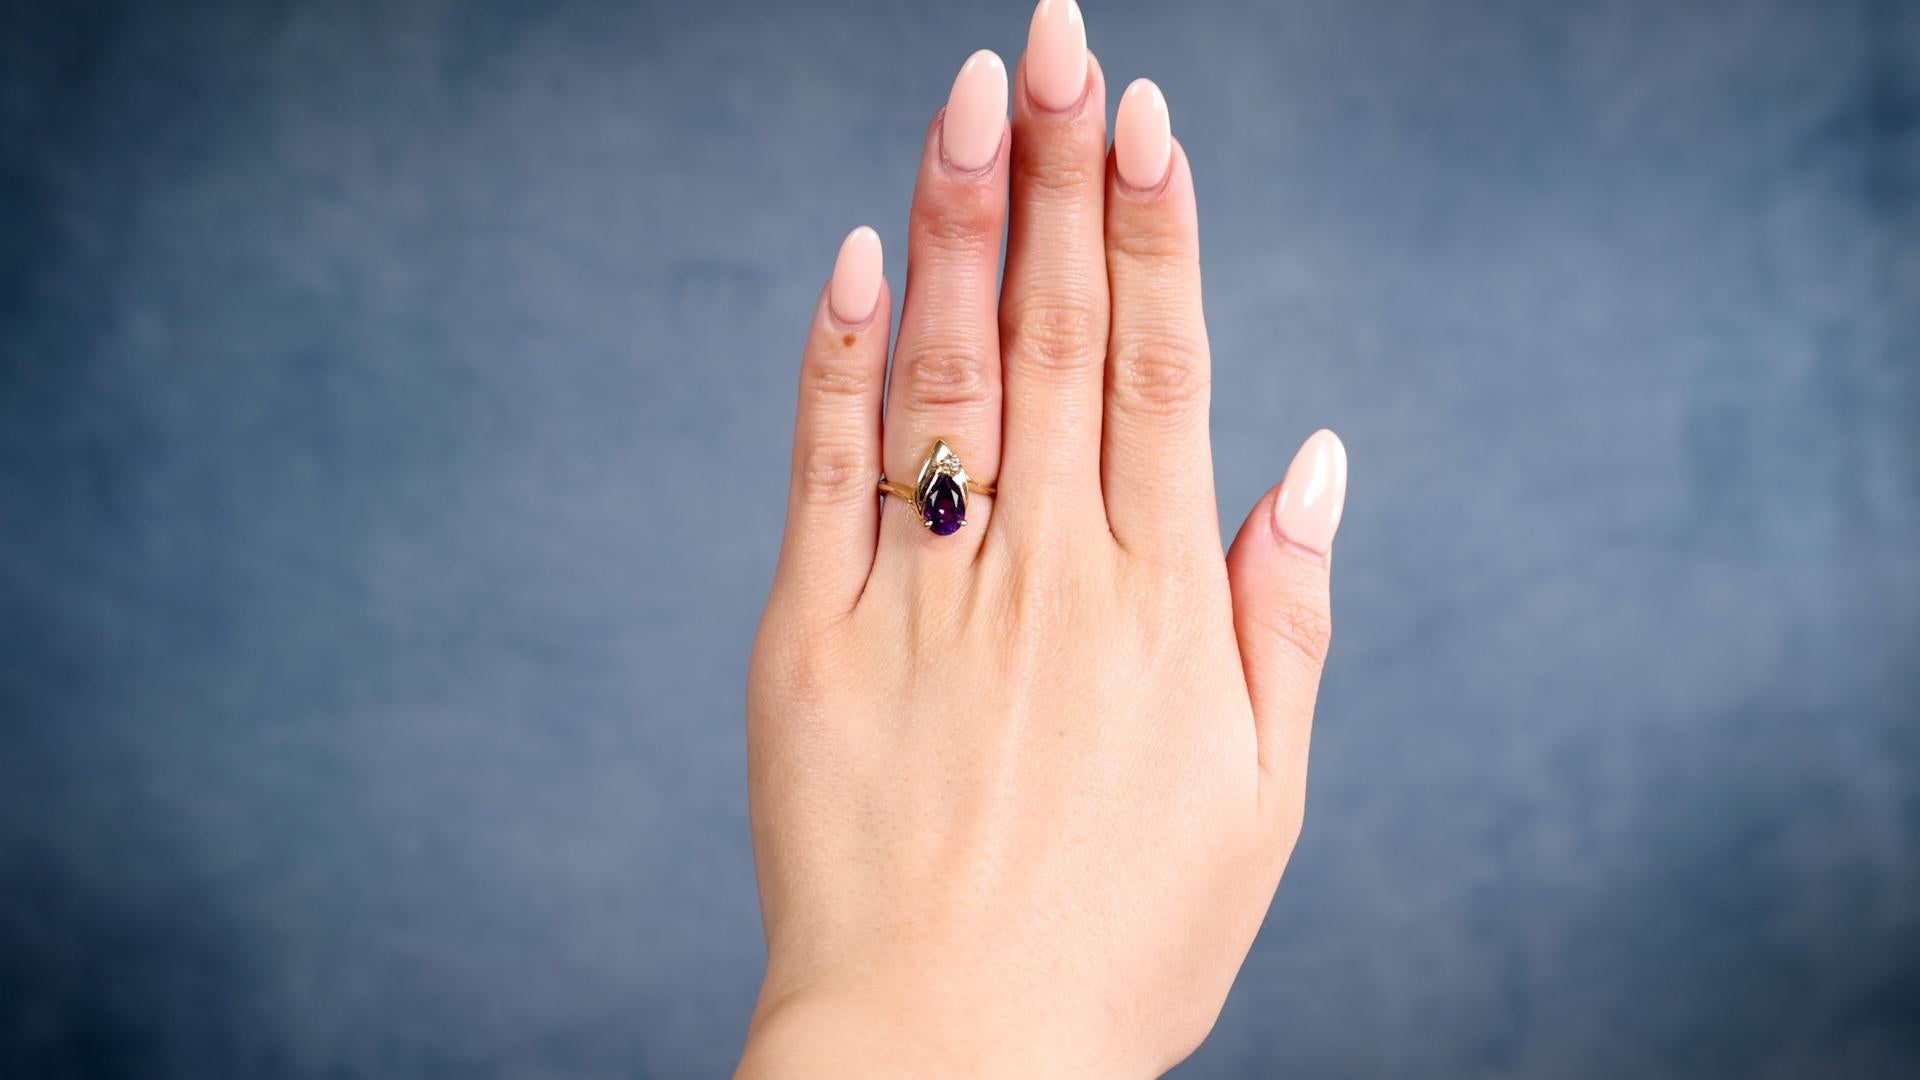 One Vintage Amethyst Diamond 14k Yellow Gold Ring. Featuring one pear brilliant cut amethyst weighing approximately 1.15 carats. Accented by one round brilliant cut diamond weighing approximately 0.05 carat, graded I color, SI1 clarity. Crafted in